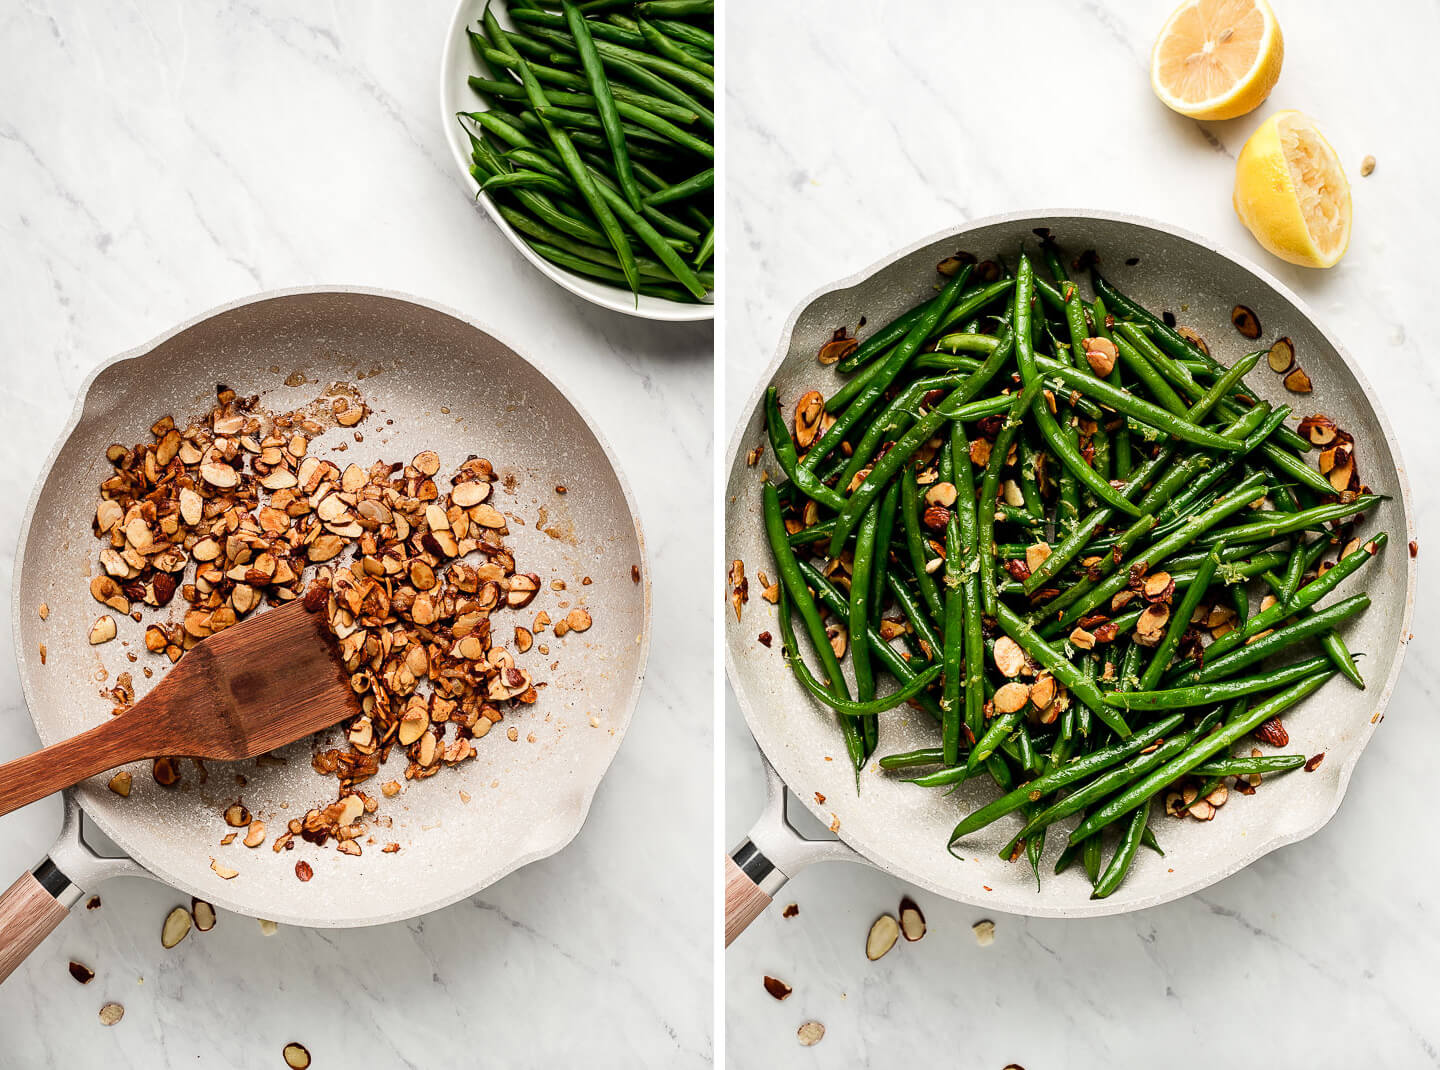 Diptych- Toasted sliced almonds in a pan with a bowl of green beans to the side; a pan of green beans with toasted almonds and halved lemons to the side.